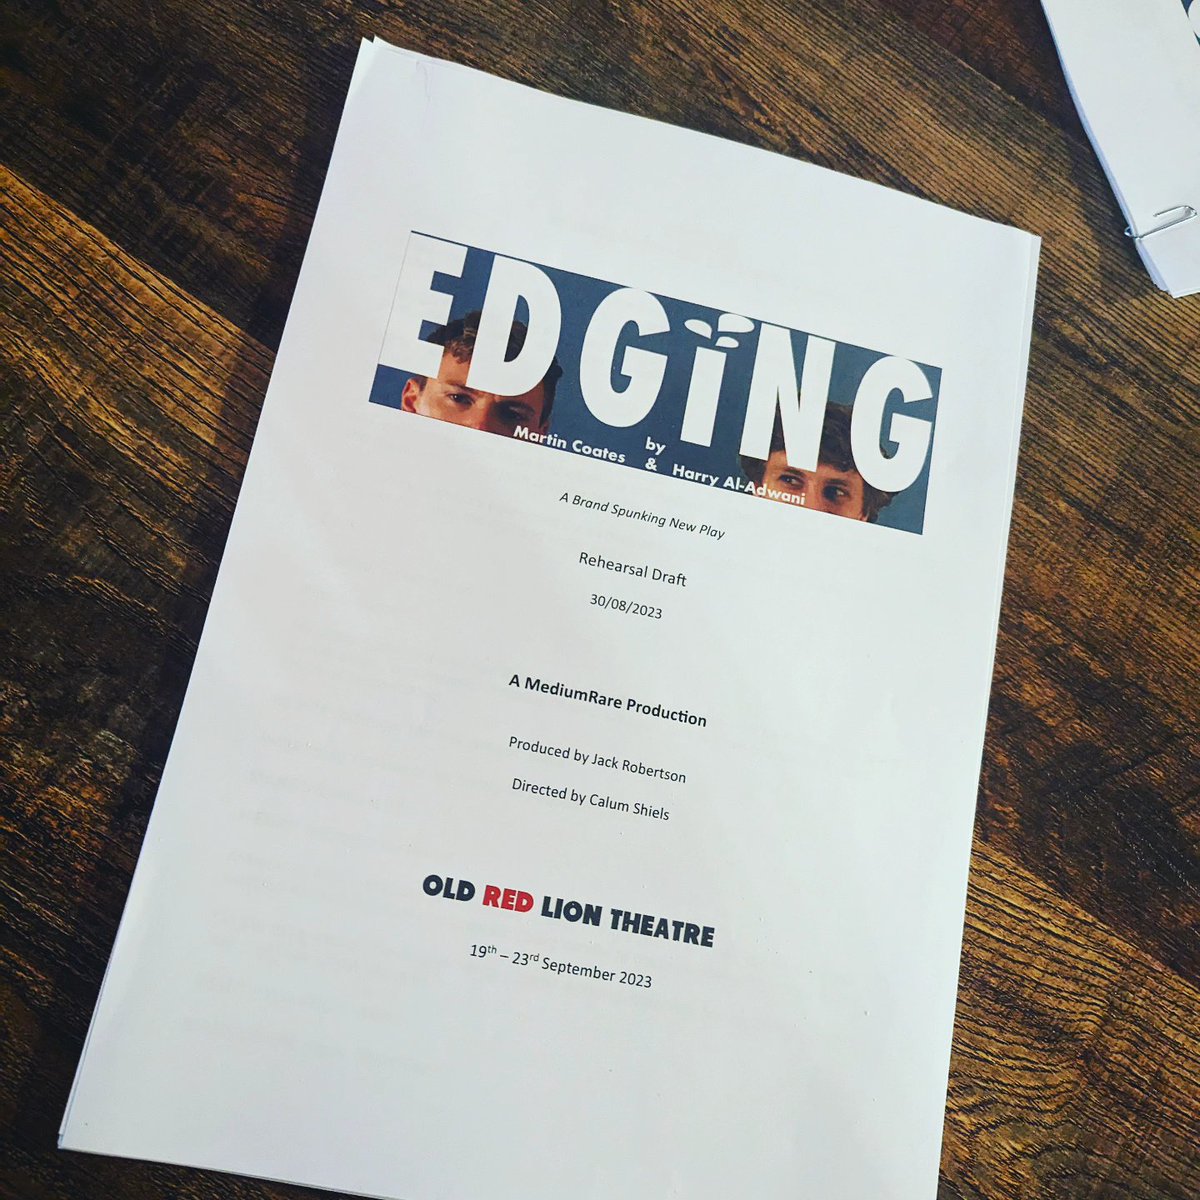 First day of rehearsals done 💪 This is going to be a lot of fun 📖🤪

#edgingtheplay #comedy #london #pubtheatre #rehearsals #queerstories #newplay #comingsoon #newwriting